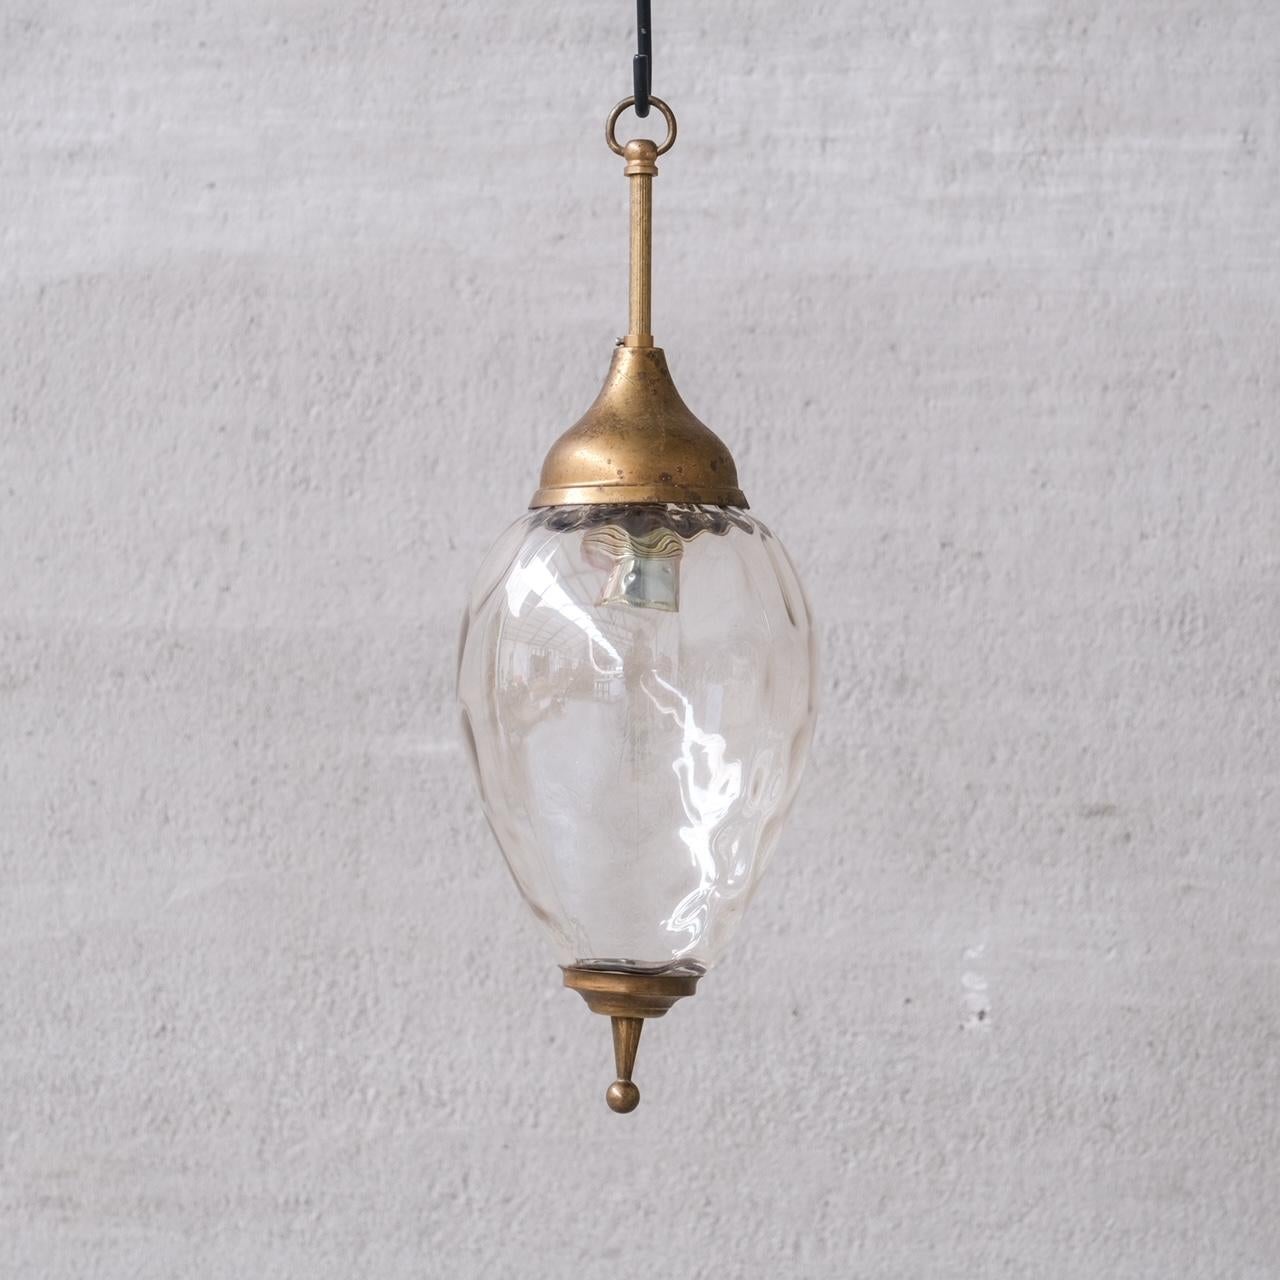 Brass and undulating glass pendant light.

France, c1950s.

Natural patination and aging to the brass.

No chain or ceiling rose was retained, we can recommend where to source.

Good vintage condition, some scuffs and wear commensurate with